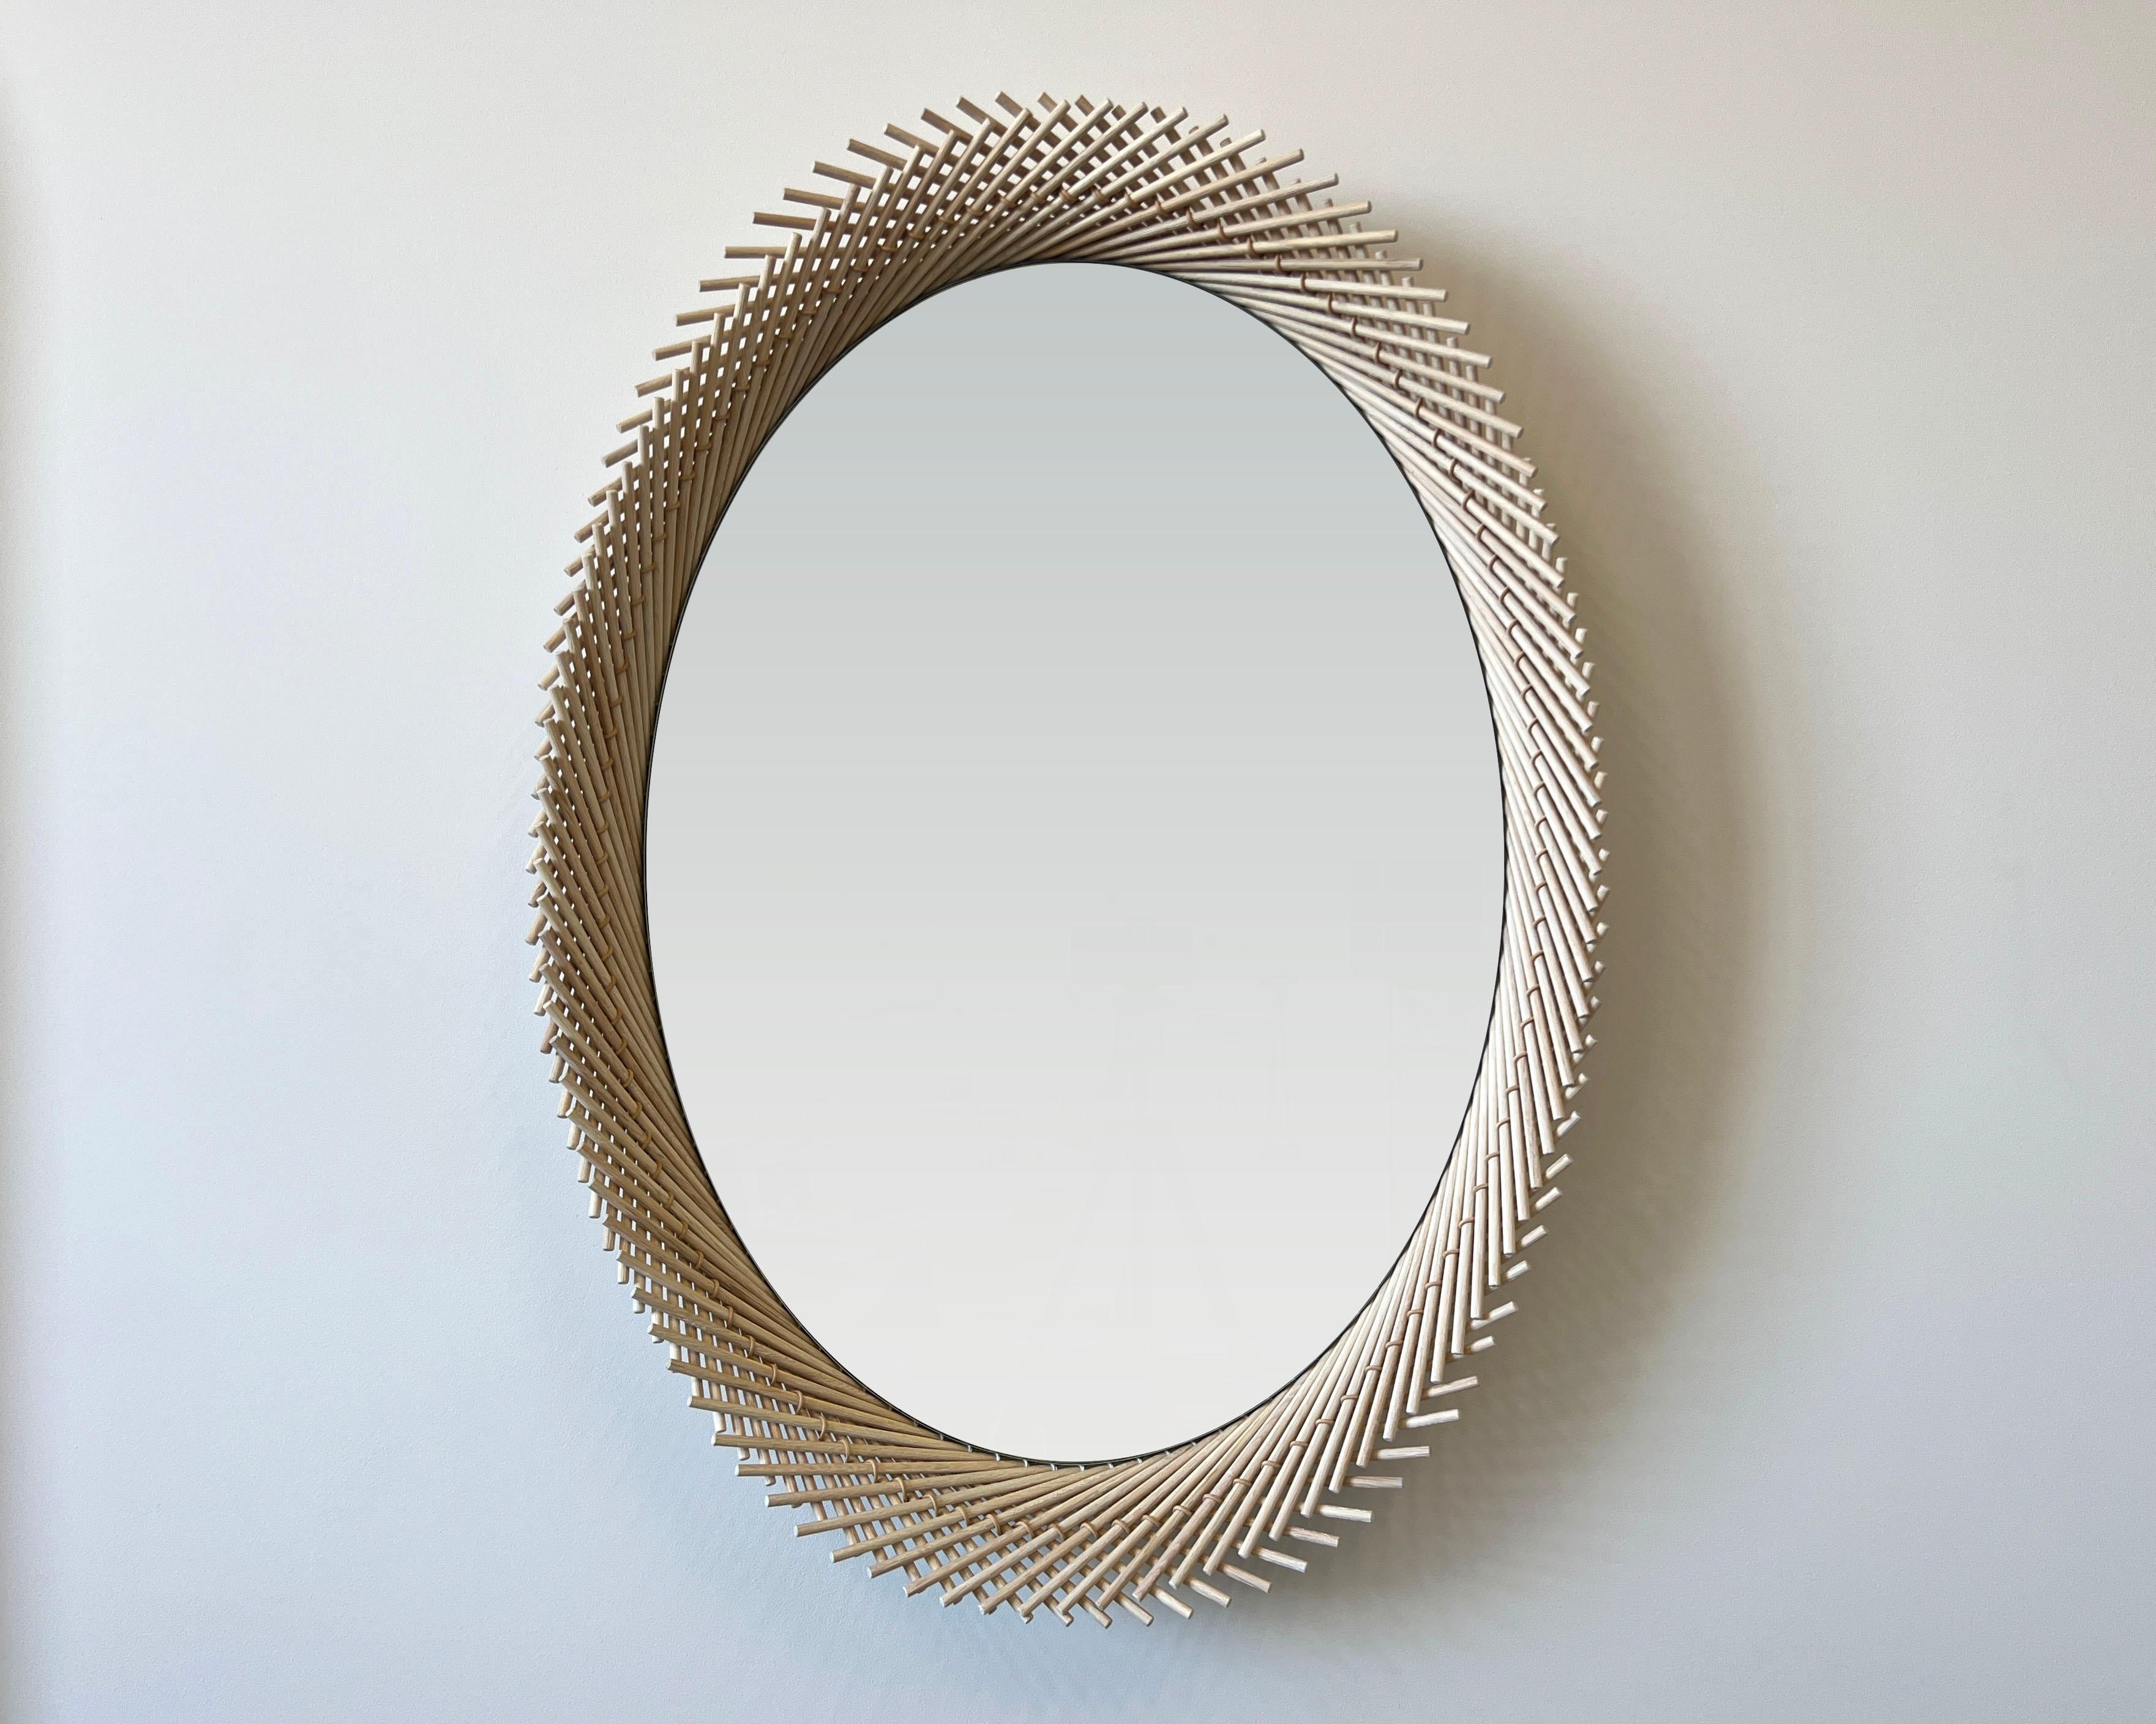 The Oval Mirror pushes the strict geometry that occurs as a result of stitching the dowels together to create a dynamic edge. Each layer of the Mooda rises and falls inversely to the other as they travel along the circumference of the mirror, giving